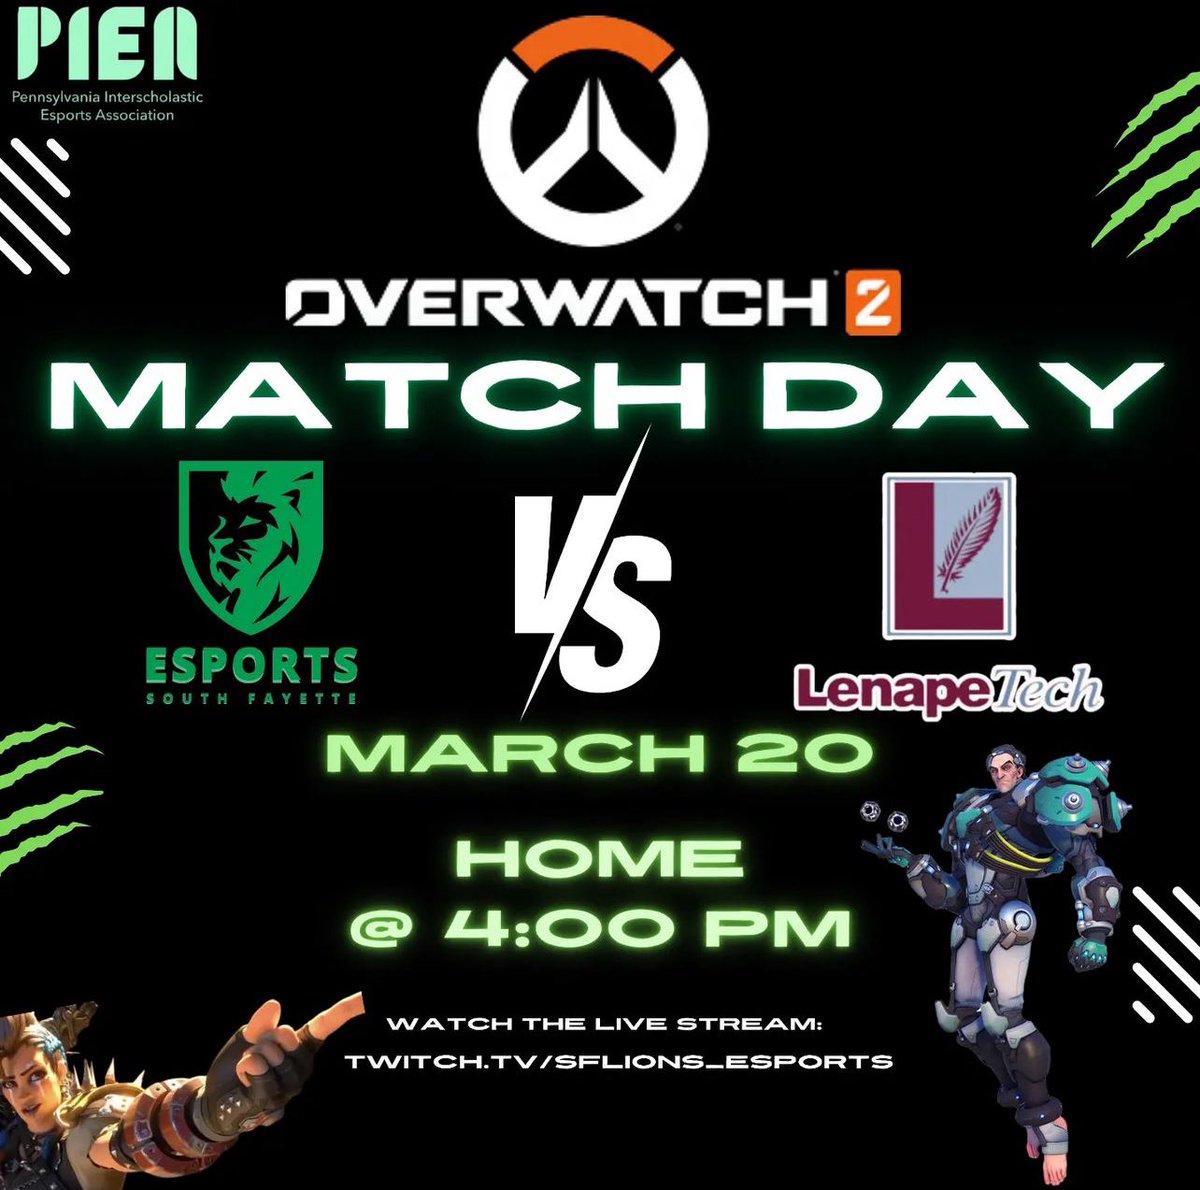 Our lions take on Lenape Tech today at 4 PM. Tune into the live stream to watch all of the action! Twitch: twitch.tv/SFLions_Esports #shslionpride #SFLionPride #overwatch